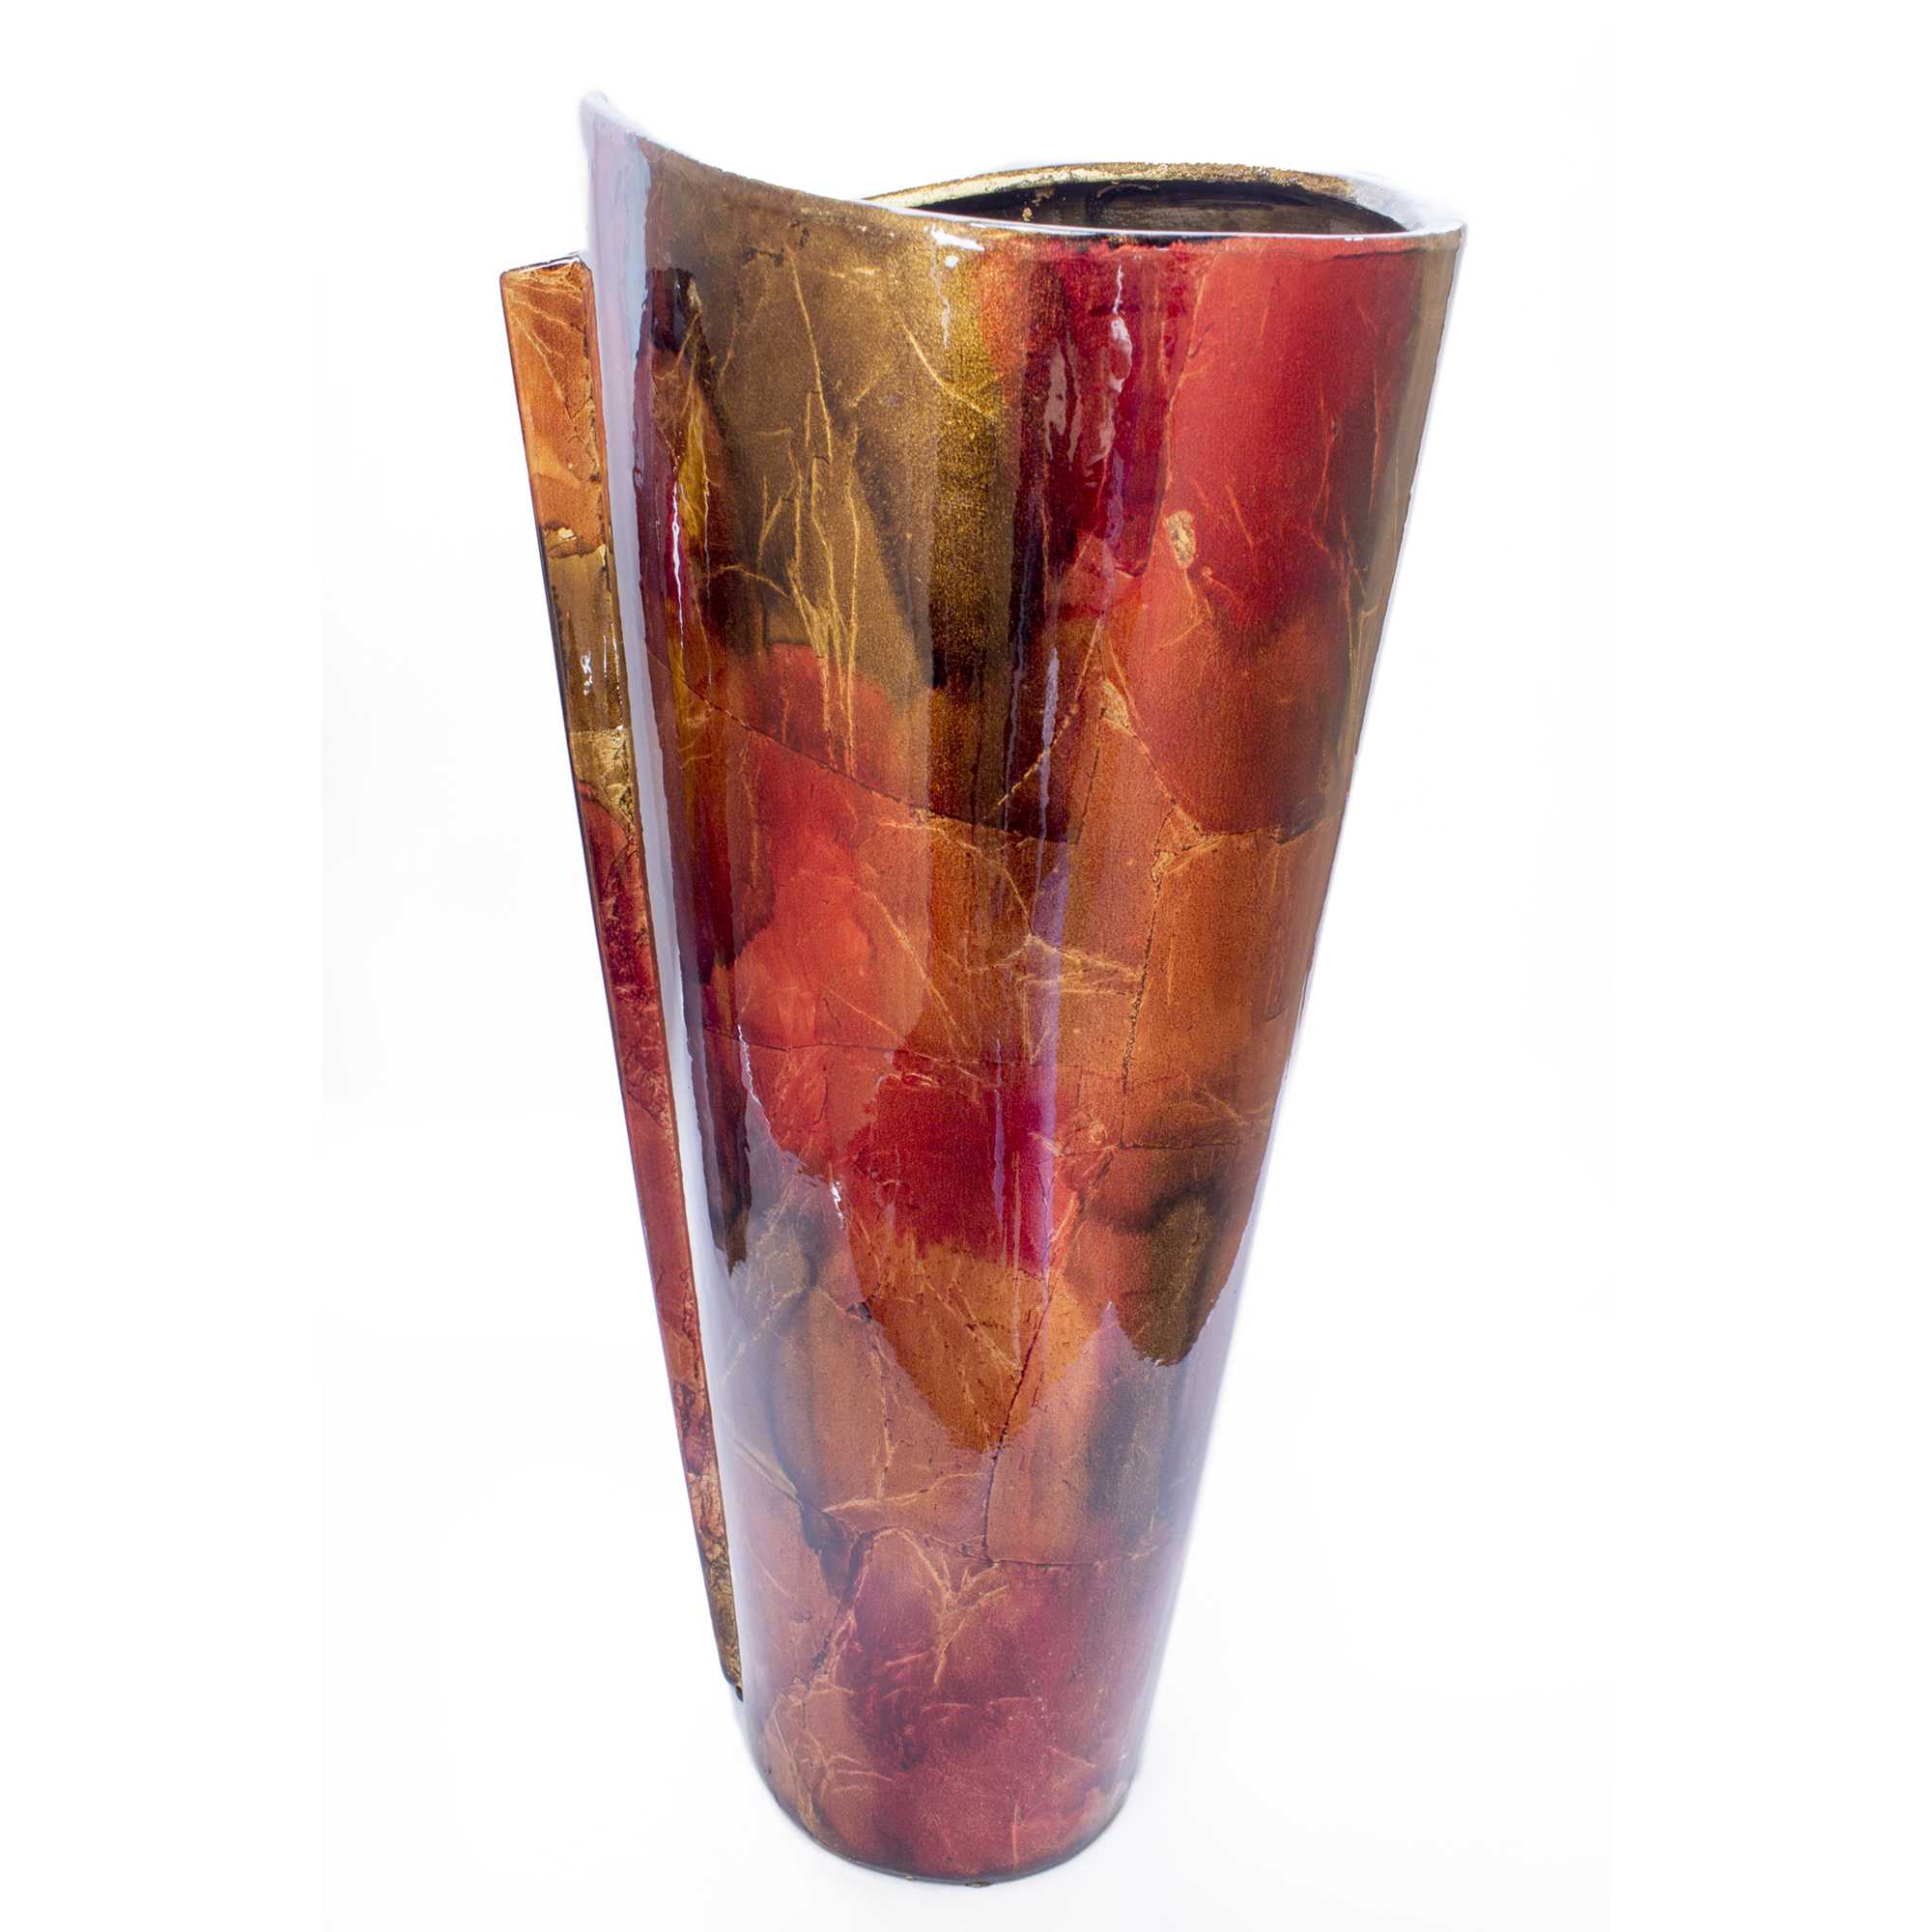 Zola Copper Red Gold Ceramic Foiled and Lacquered Tapered Vase